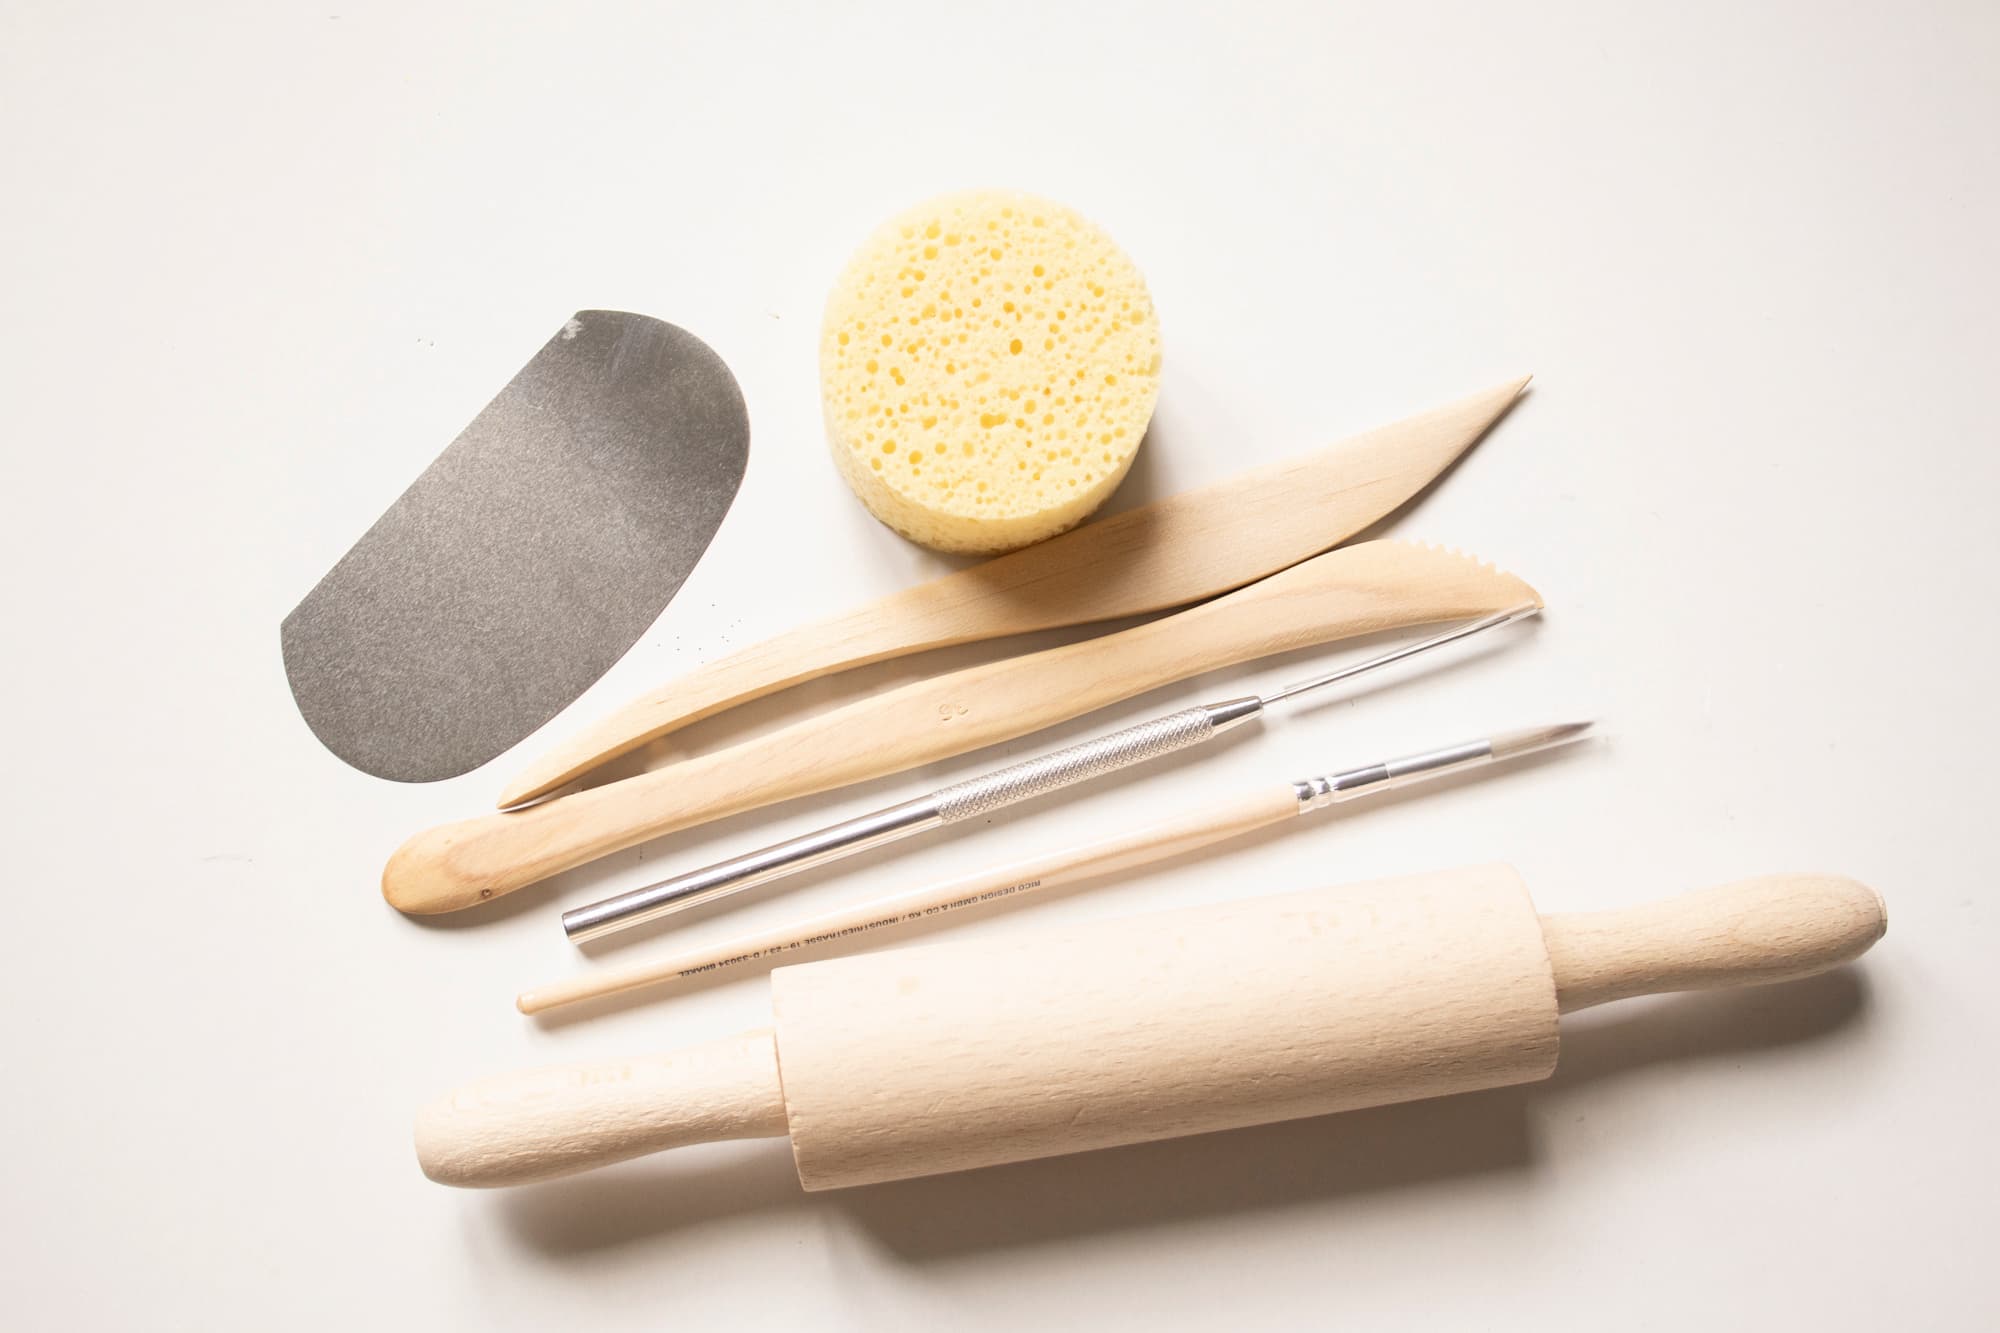 Pottery kit for making ceramics at home - air-dry-clay kit for separate  addresses team events – Mesh & Cloth